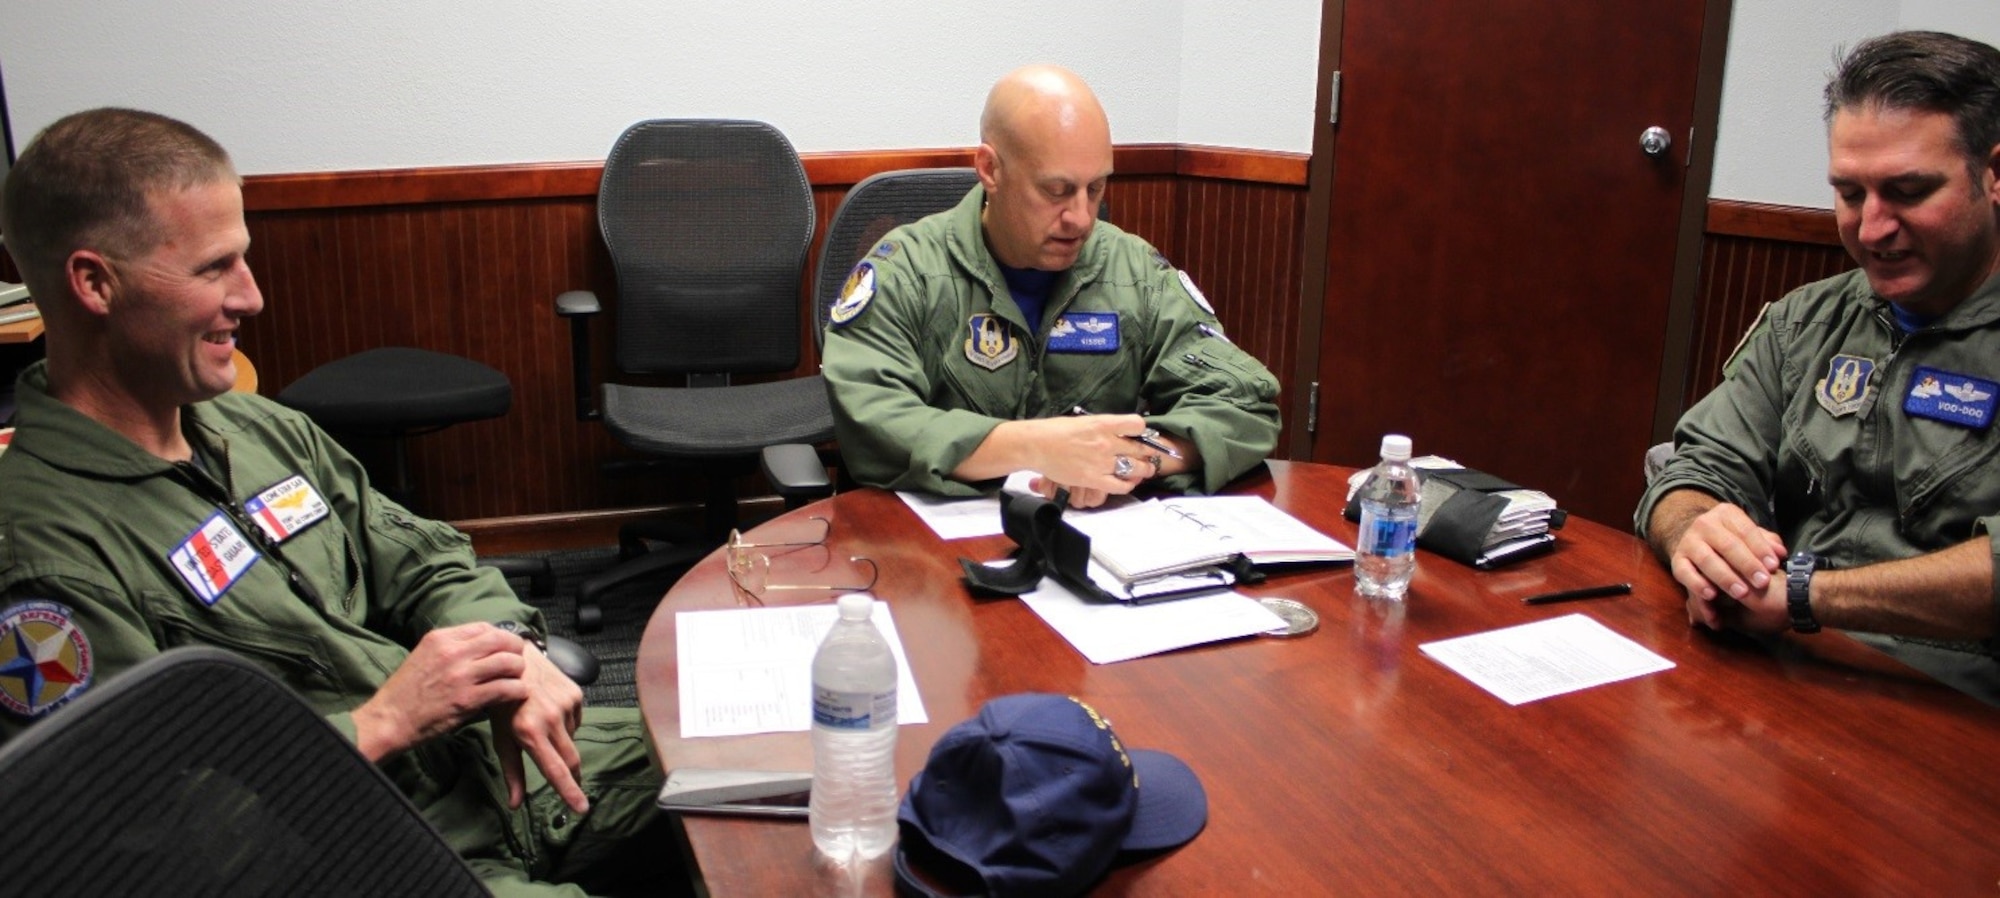 CUTLINE: Lt. Col. Andrew Kissinger (center) and Maj. Andrew Van De Walle (right), 39th Flying Training Squadron, prepare for a familiarization flight for visiting U.S. Coast Guard Commander Capt. Tony Hahn (left). The USCG Corpus Christi sector commander/air station commanding officer reached out to the 39th FTG to discuss pilot retention/recruiting and reserve integration benefits. (Photo by Debbie Gildea, 340th Flying Training Group Public Affairs).